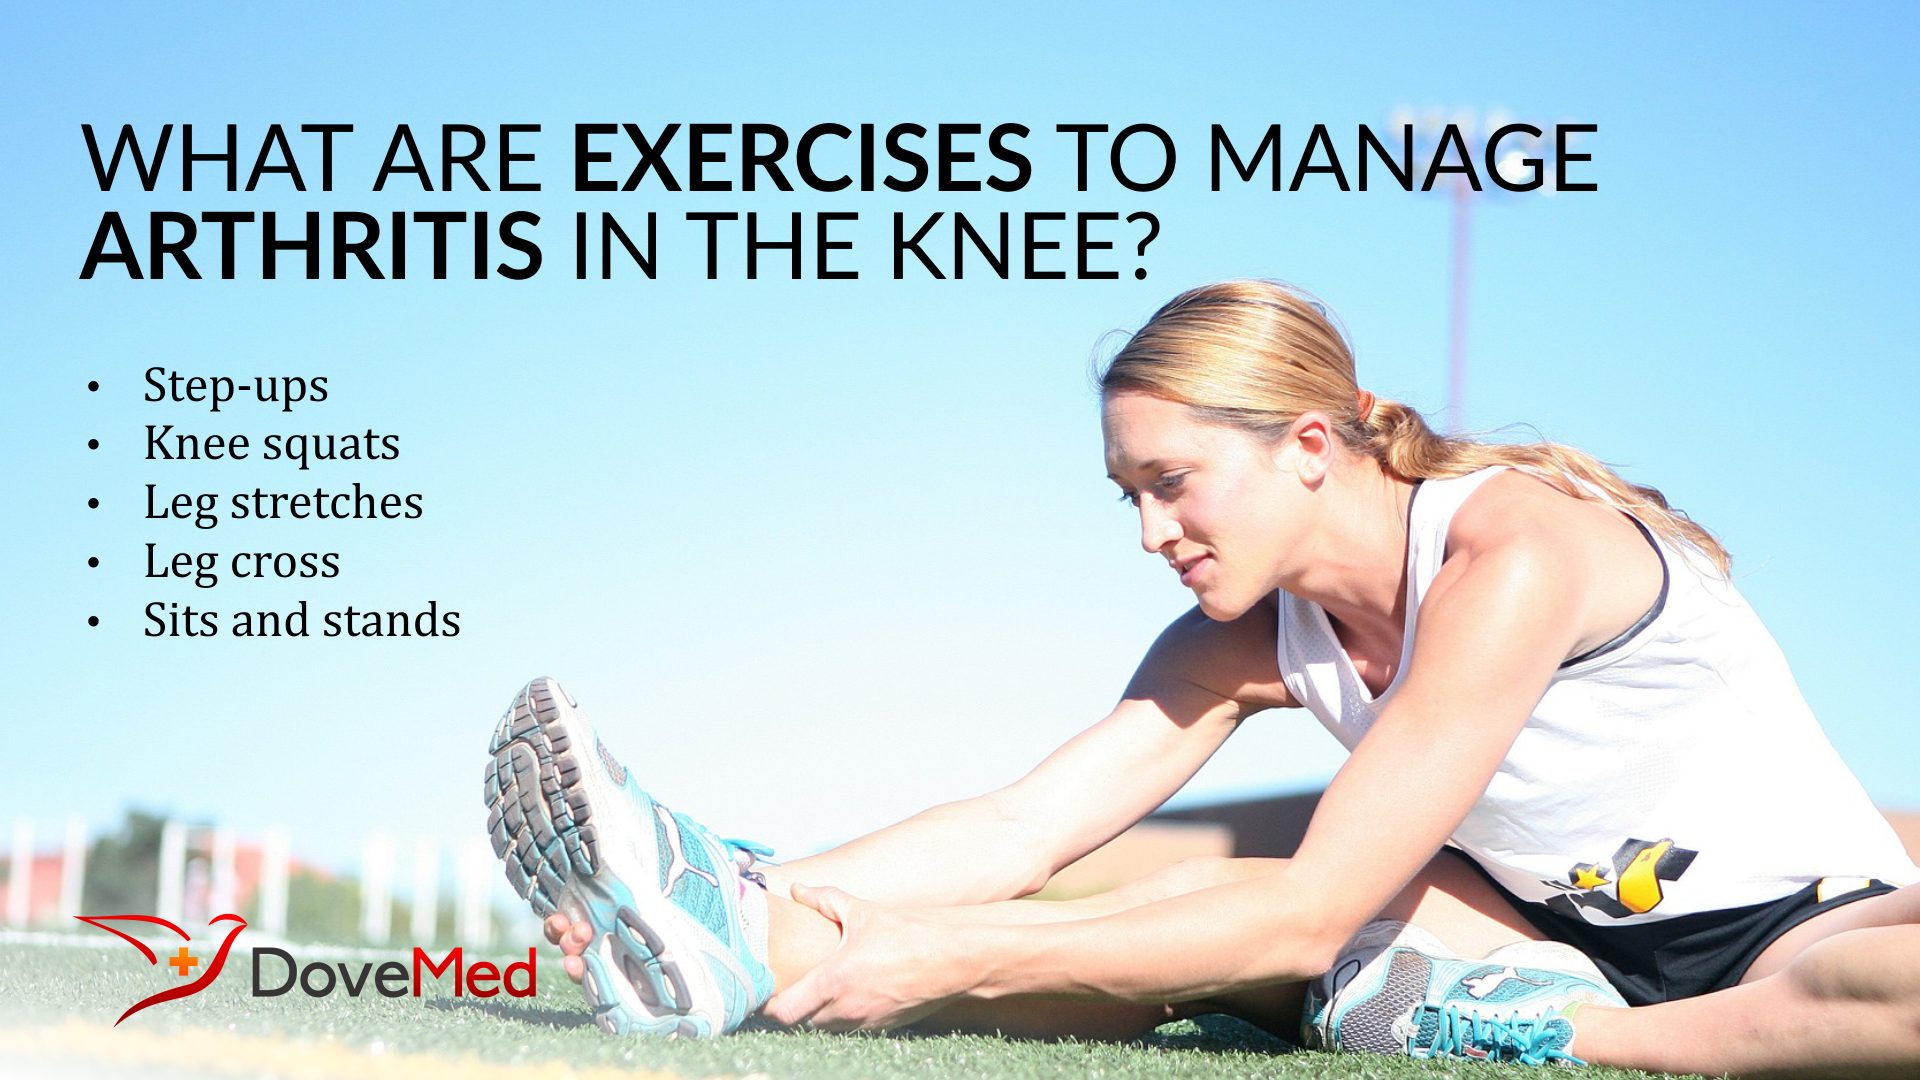 What Are Exercises To Manage Arthritis In The Knee?